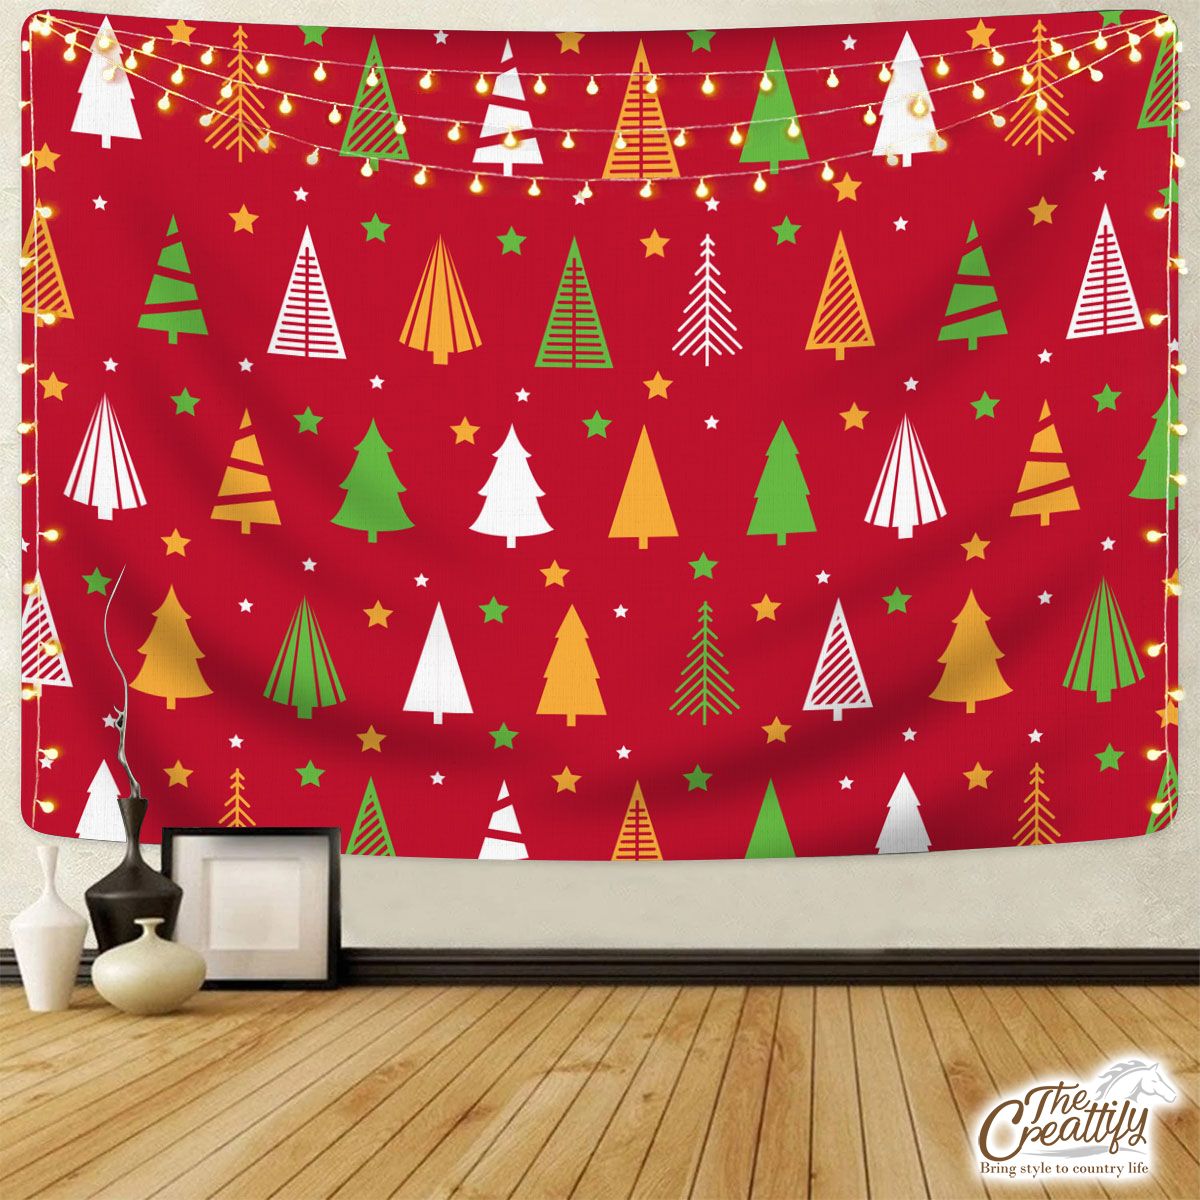 Red Green And White Christmas Tree With Star Tapestry